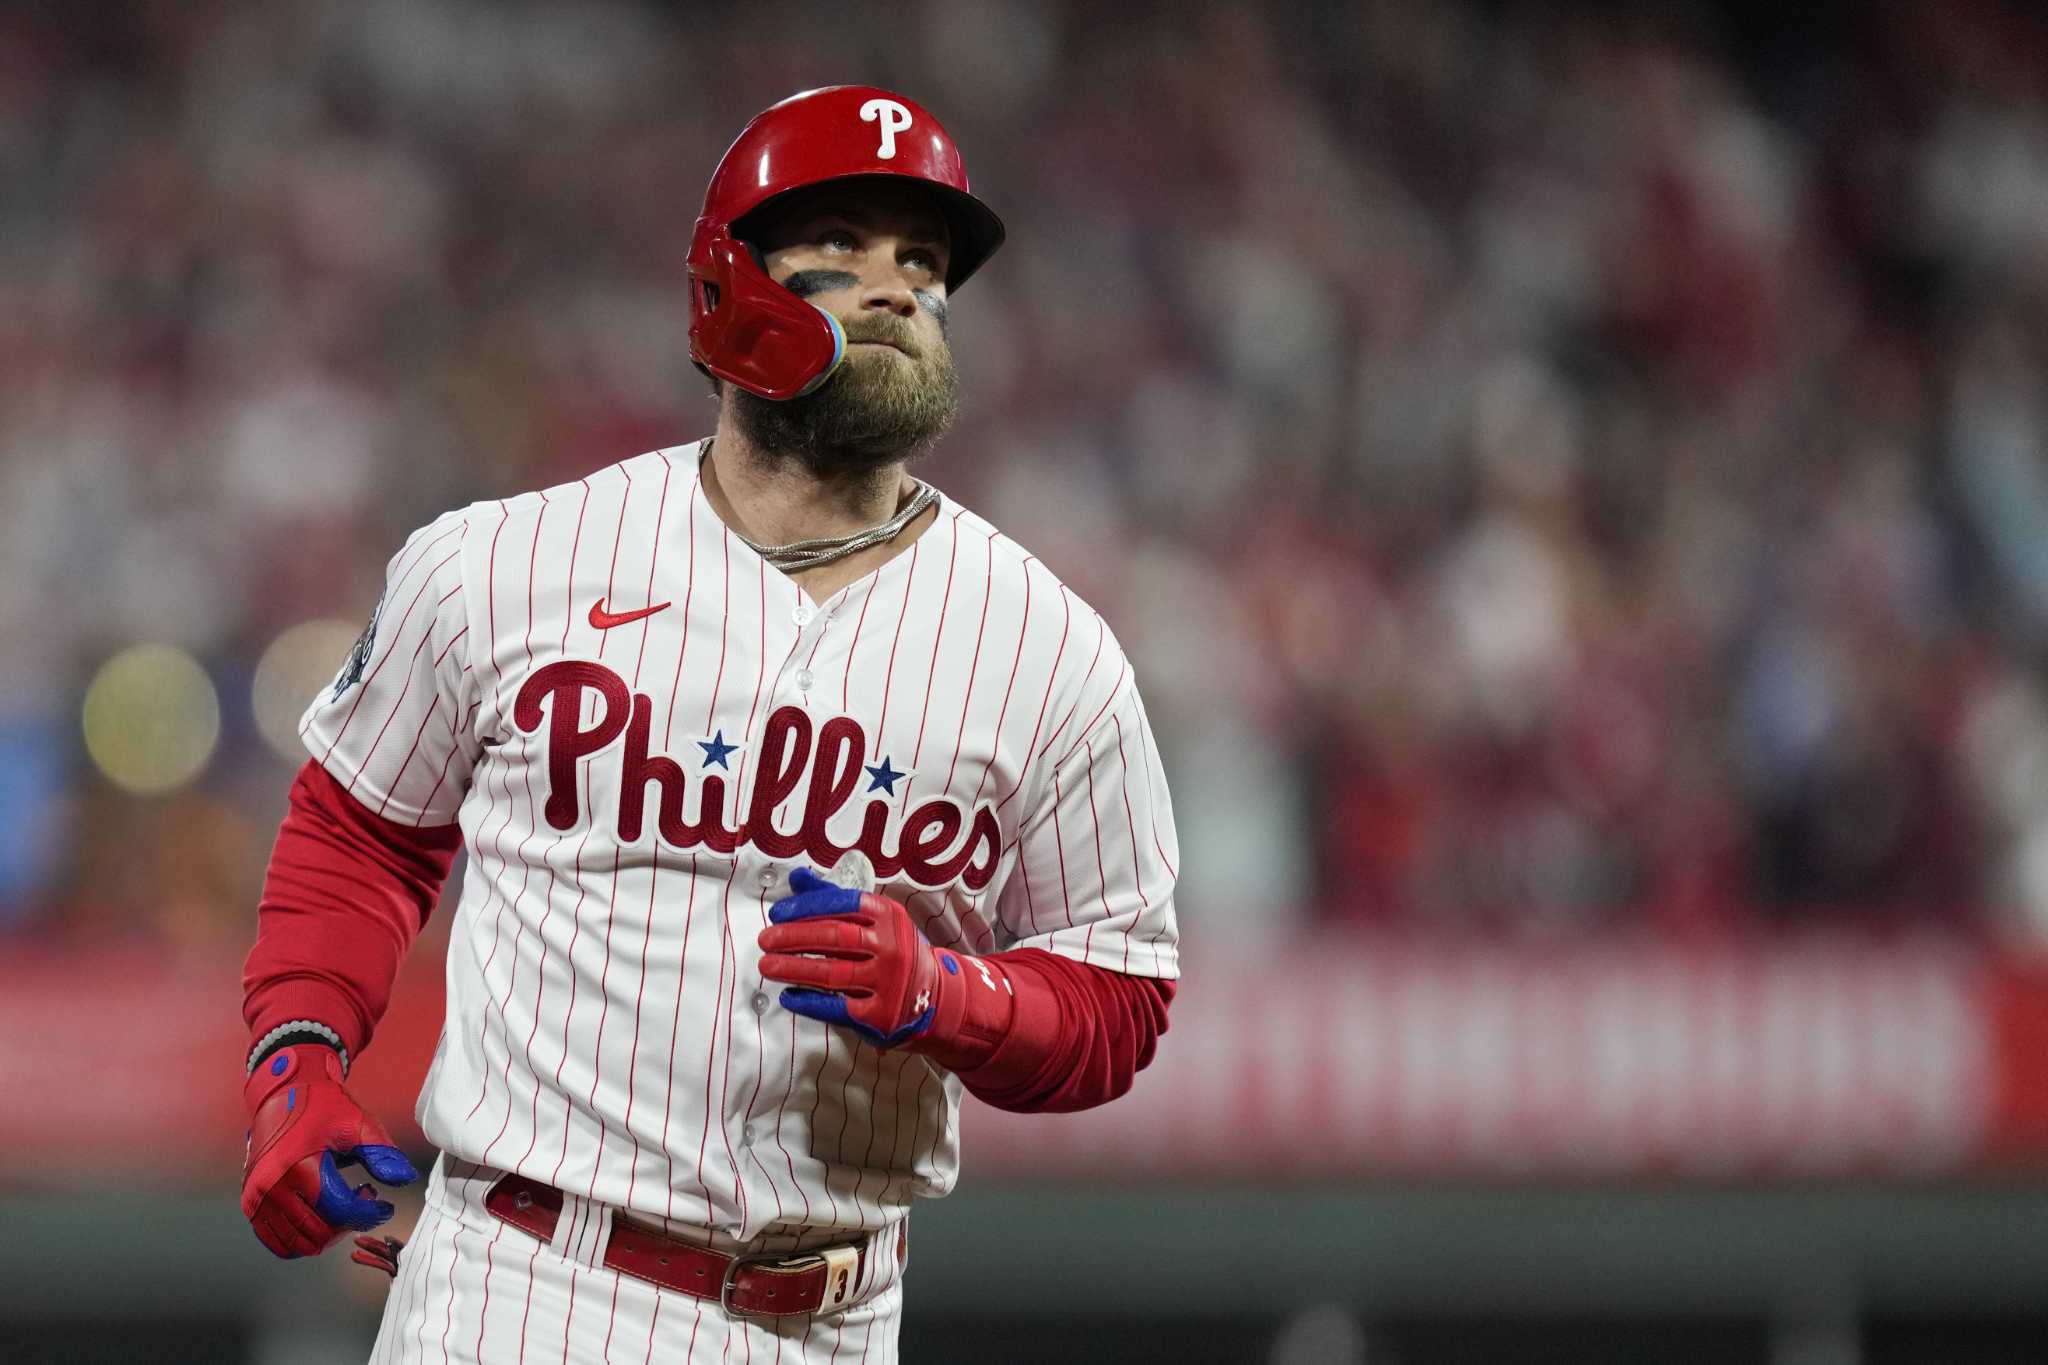 World Series: The best Phillies merchandise to buy after winning